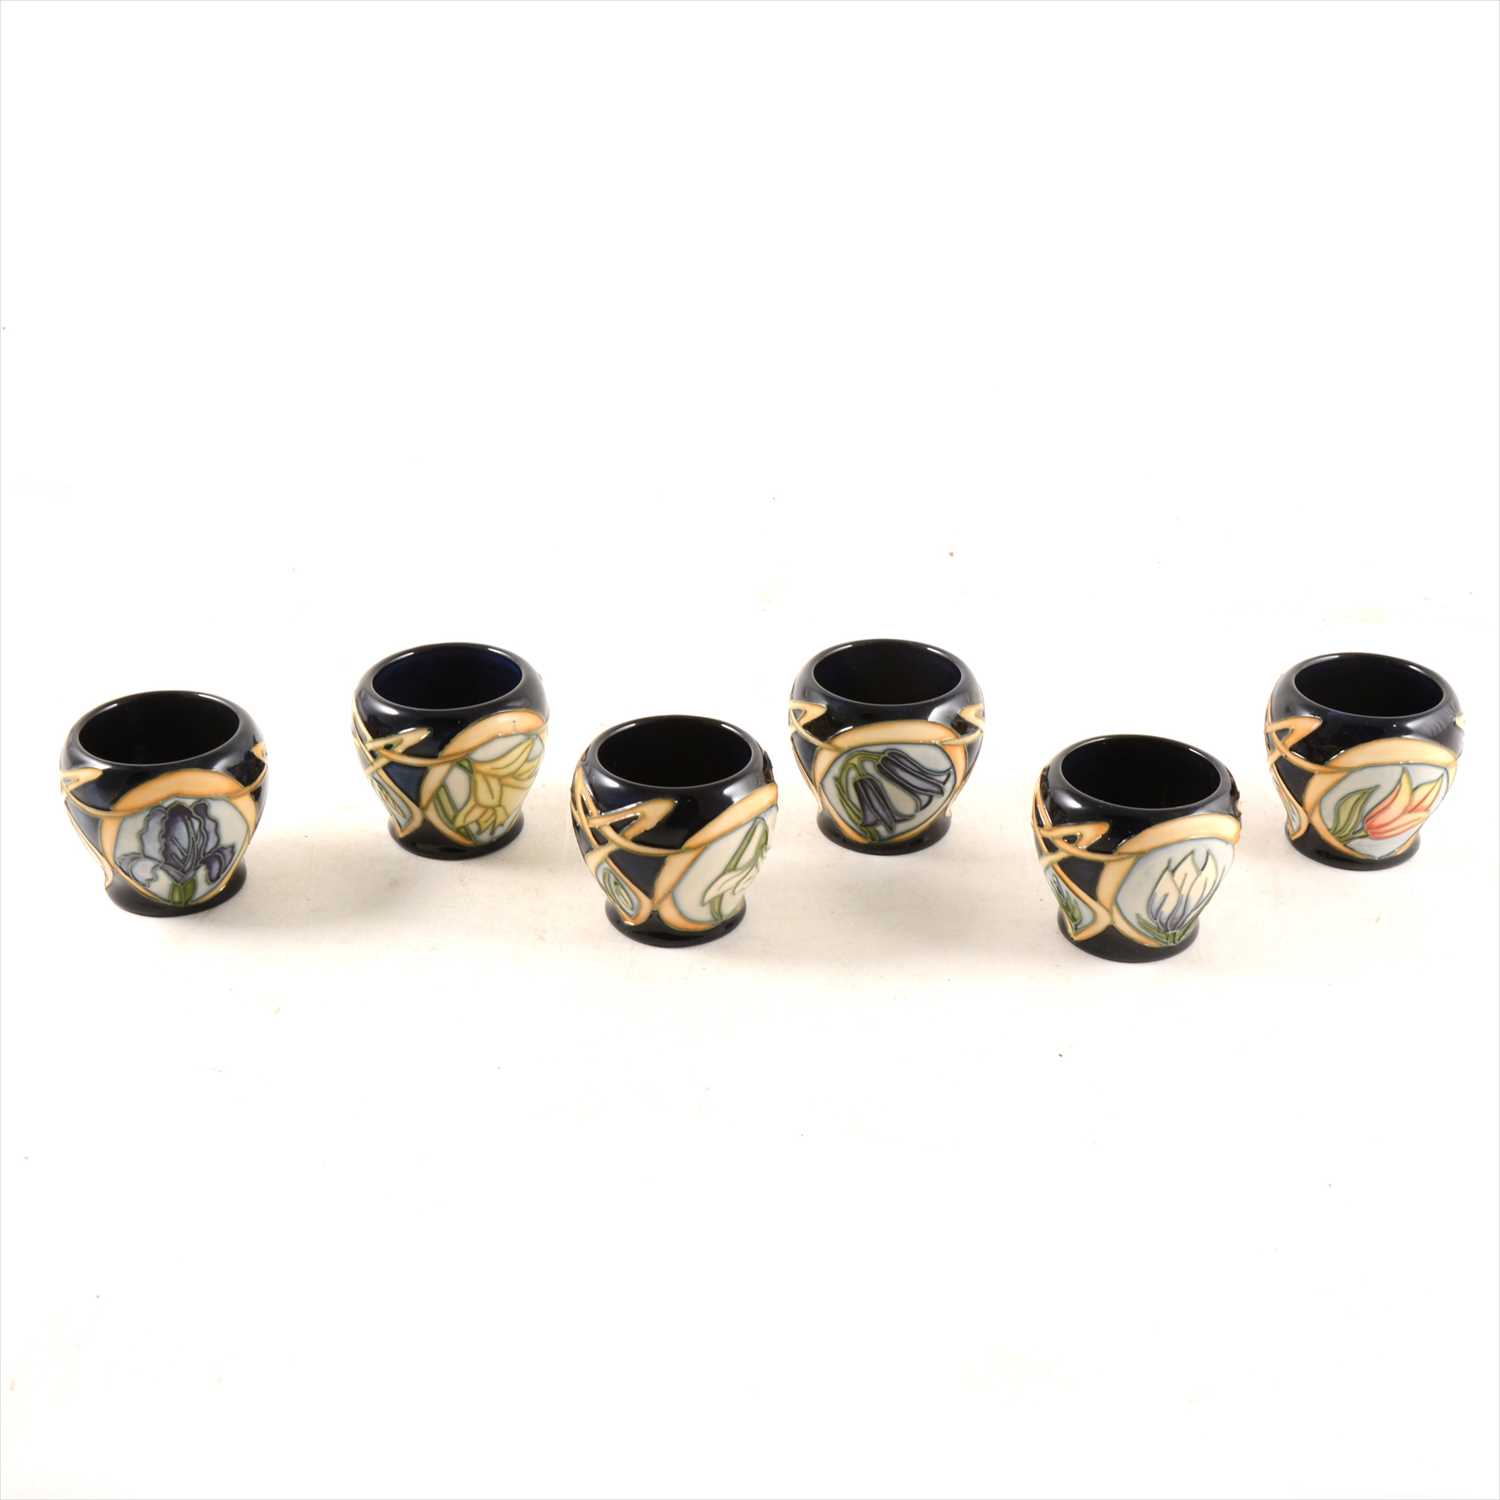 Lot 3 - A set of six egg cups, Parisian Dream, designed by Sian Leeper for Moorcroft Pottery, 2004.